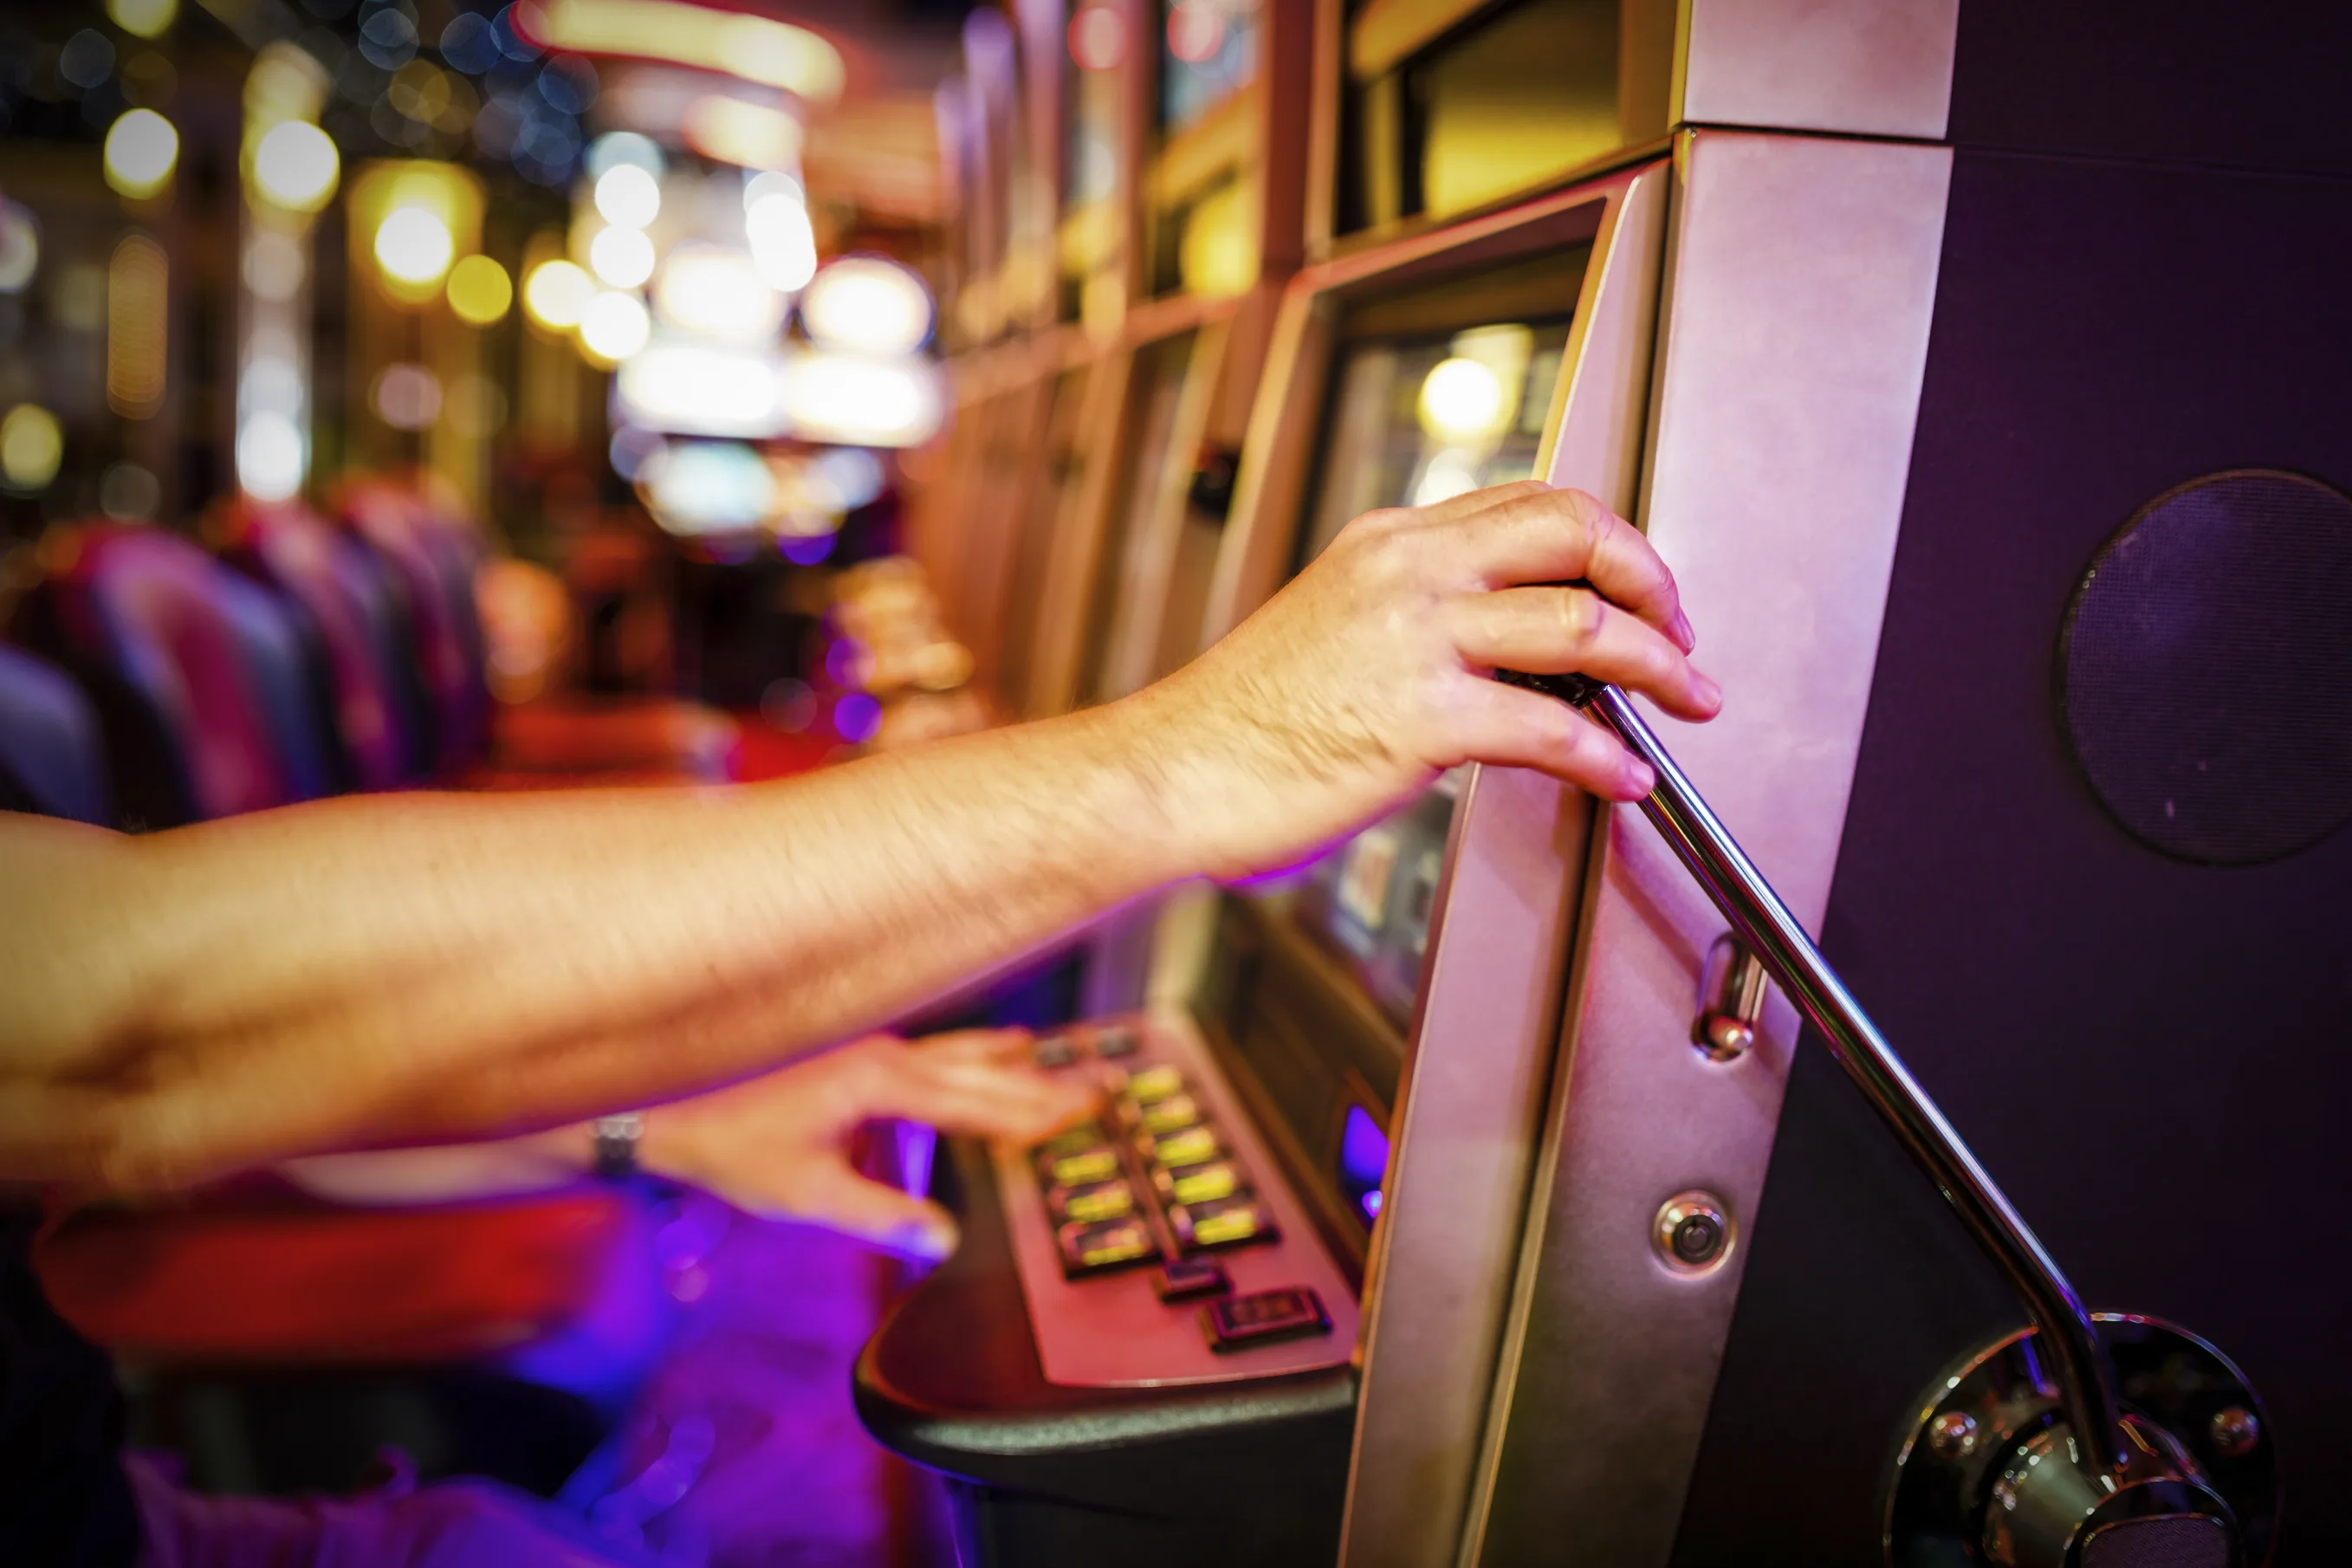 Game In Casinos With Pulled Lever